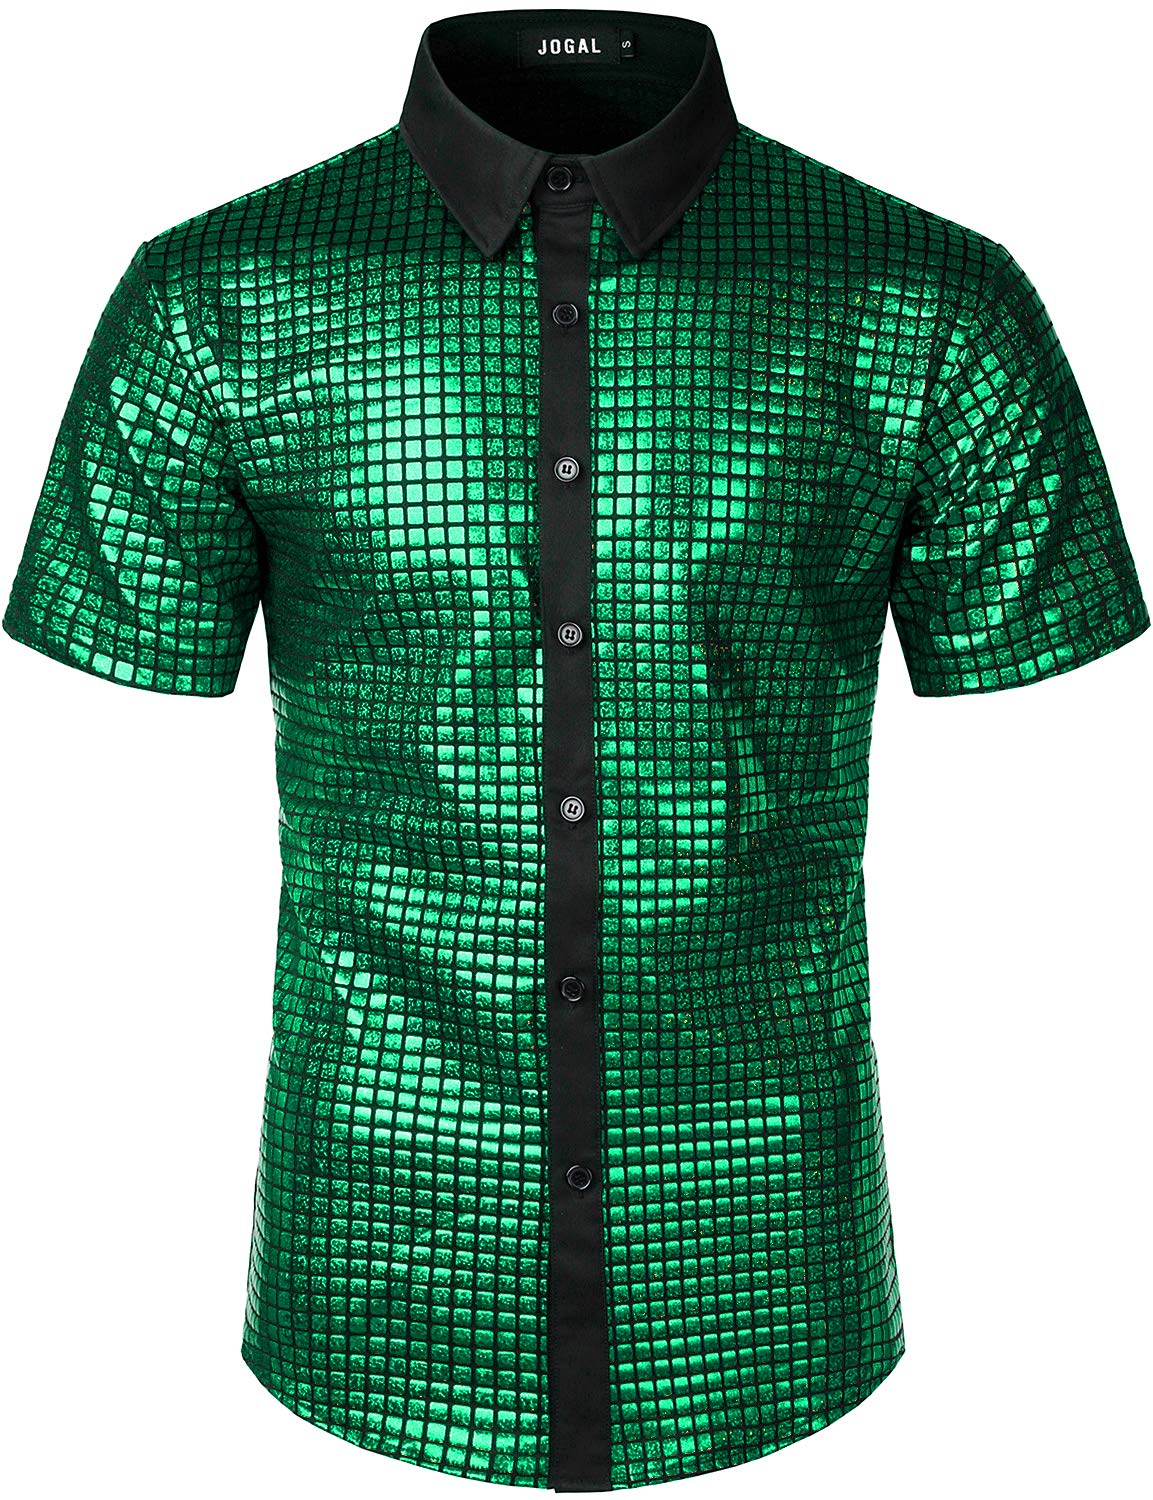 JOgAL Mens Sequins Short Sleeve Button Down Shirts 70s Disco Party costume Large A353 Forestgreen